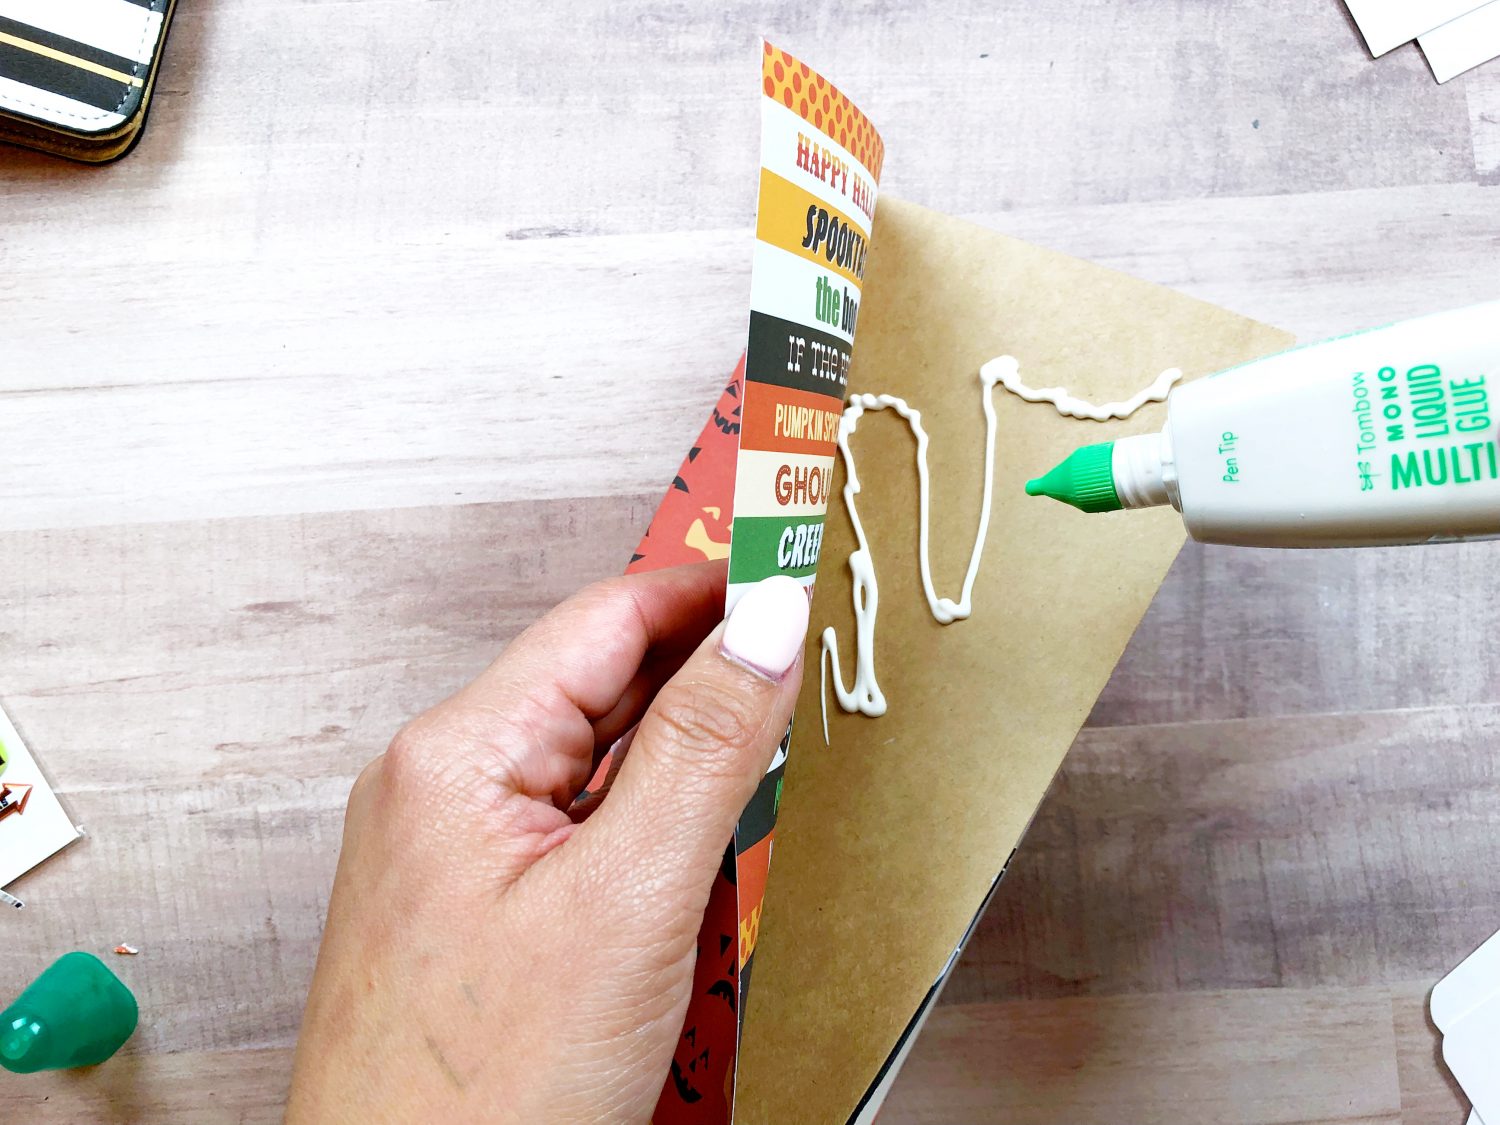 How to make your own Halloween themed traveler's notebook using @tombowusa products